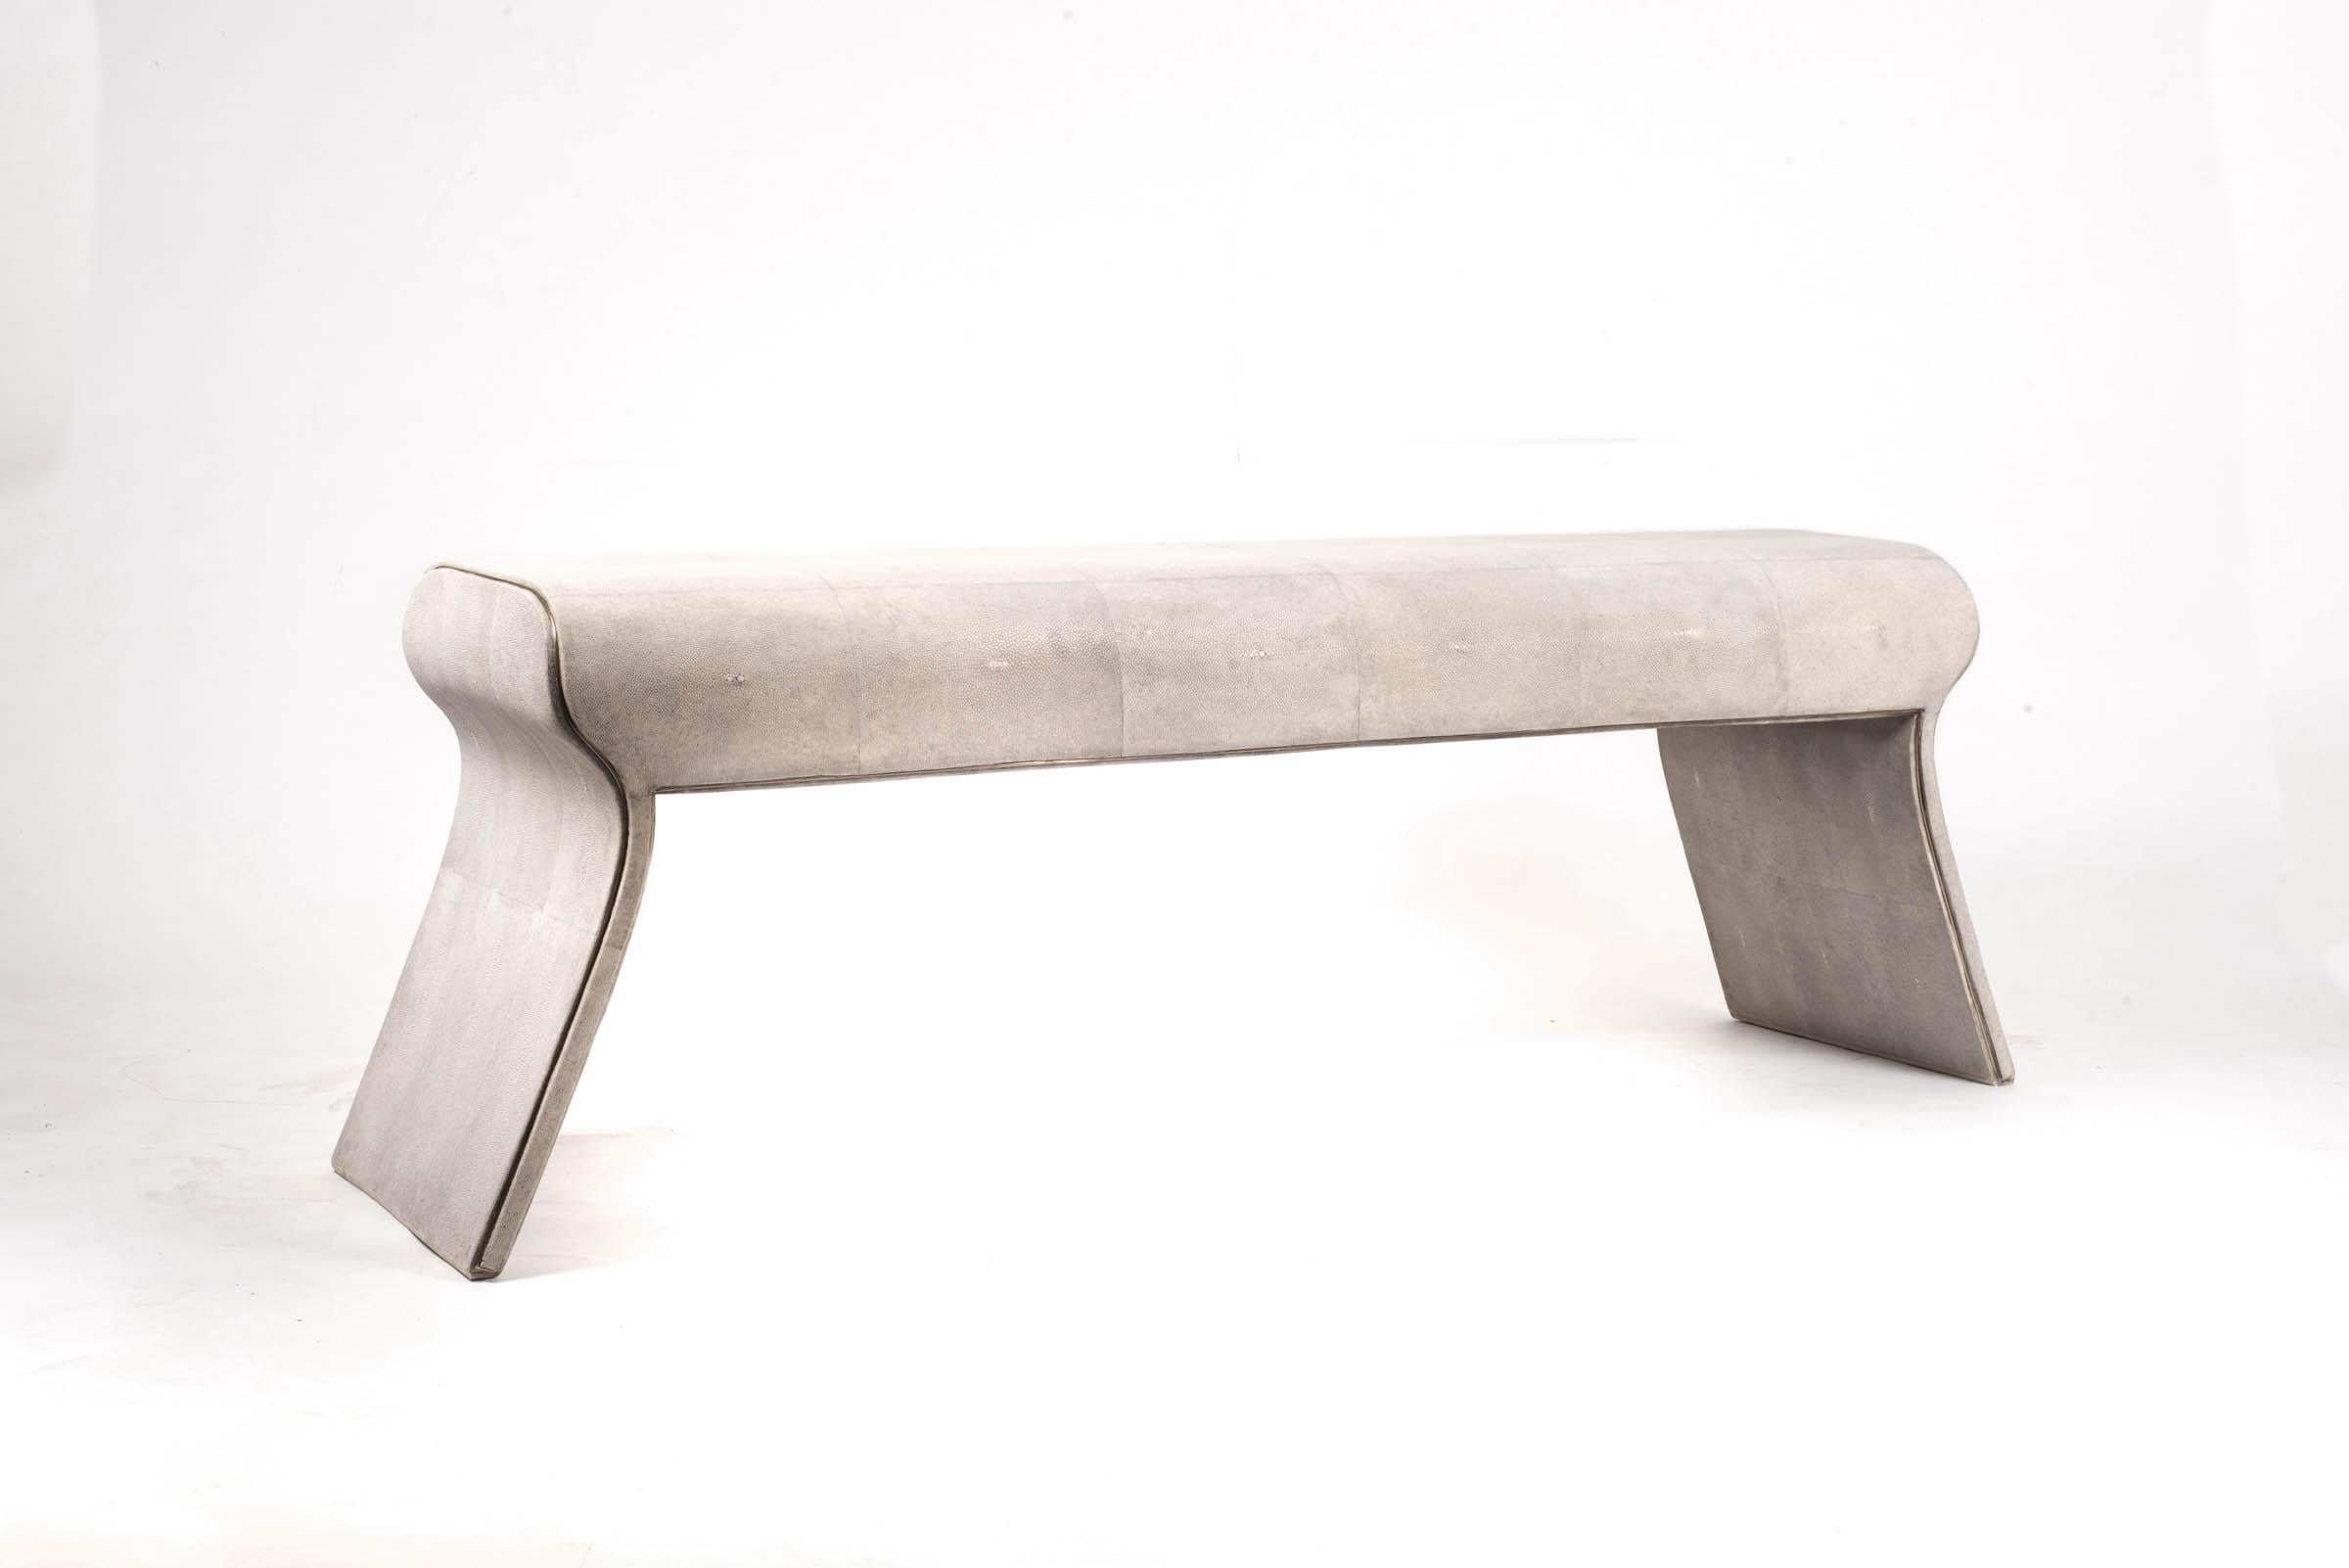 Dandy Stool Upholstered in Cream Fur & Bronze-Patina Brass Details by Kifu Paris For Sale 7